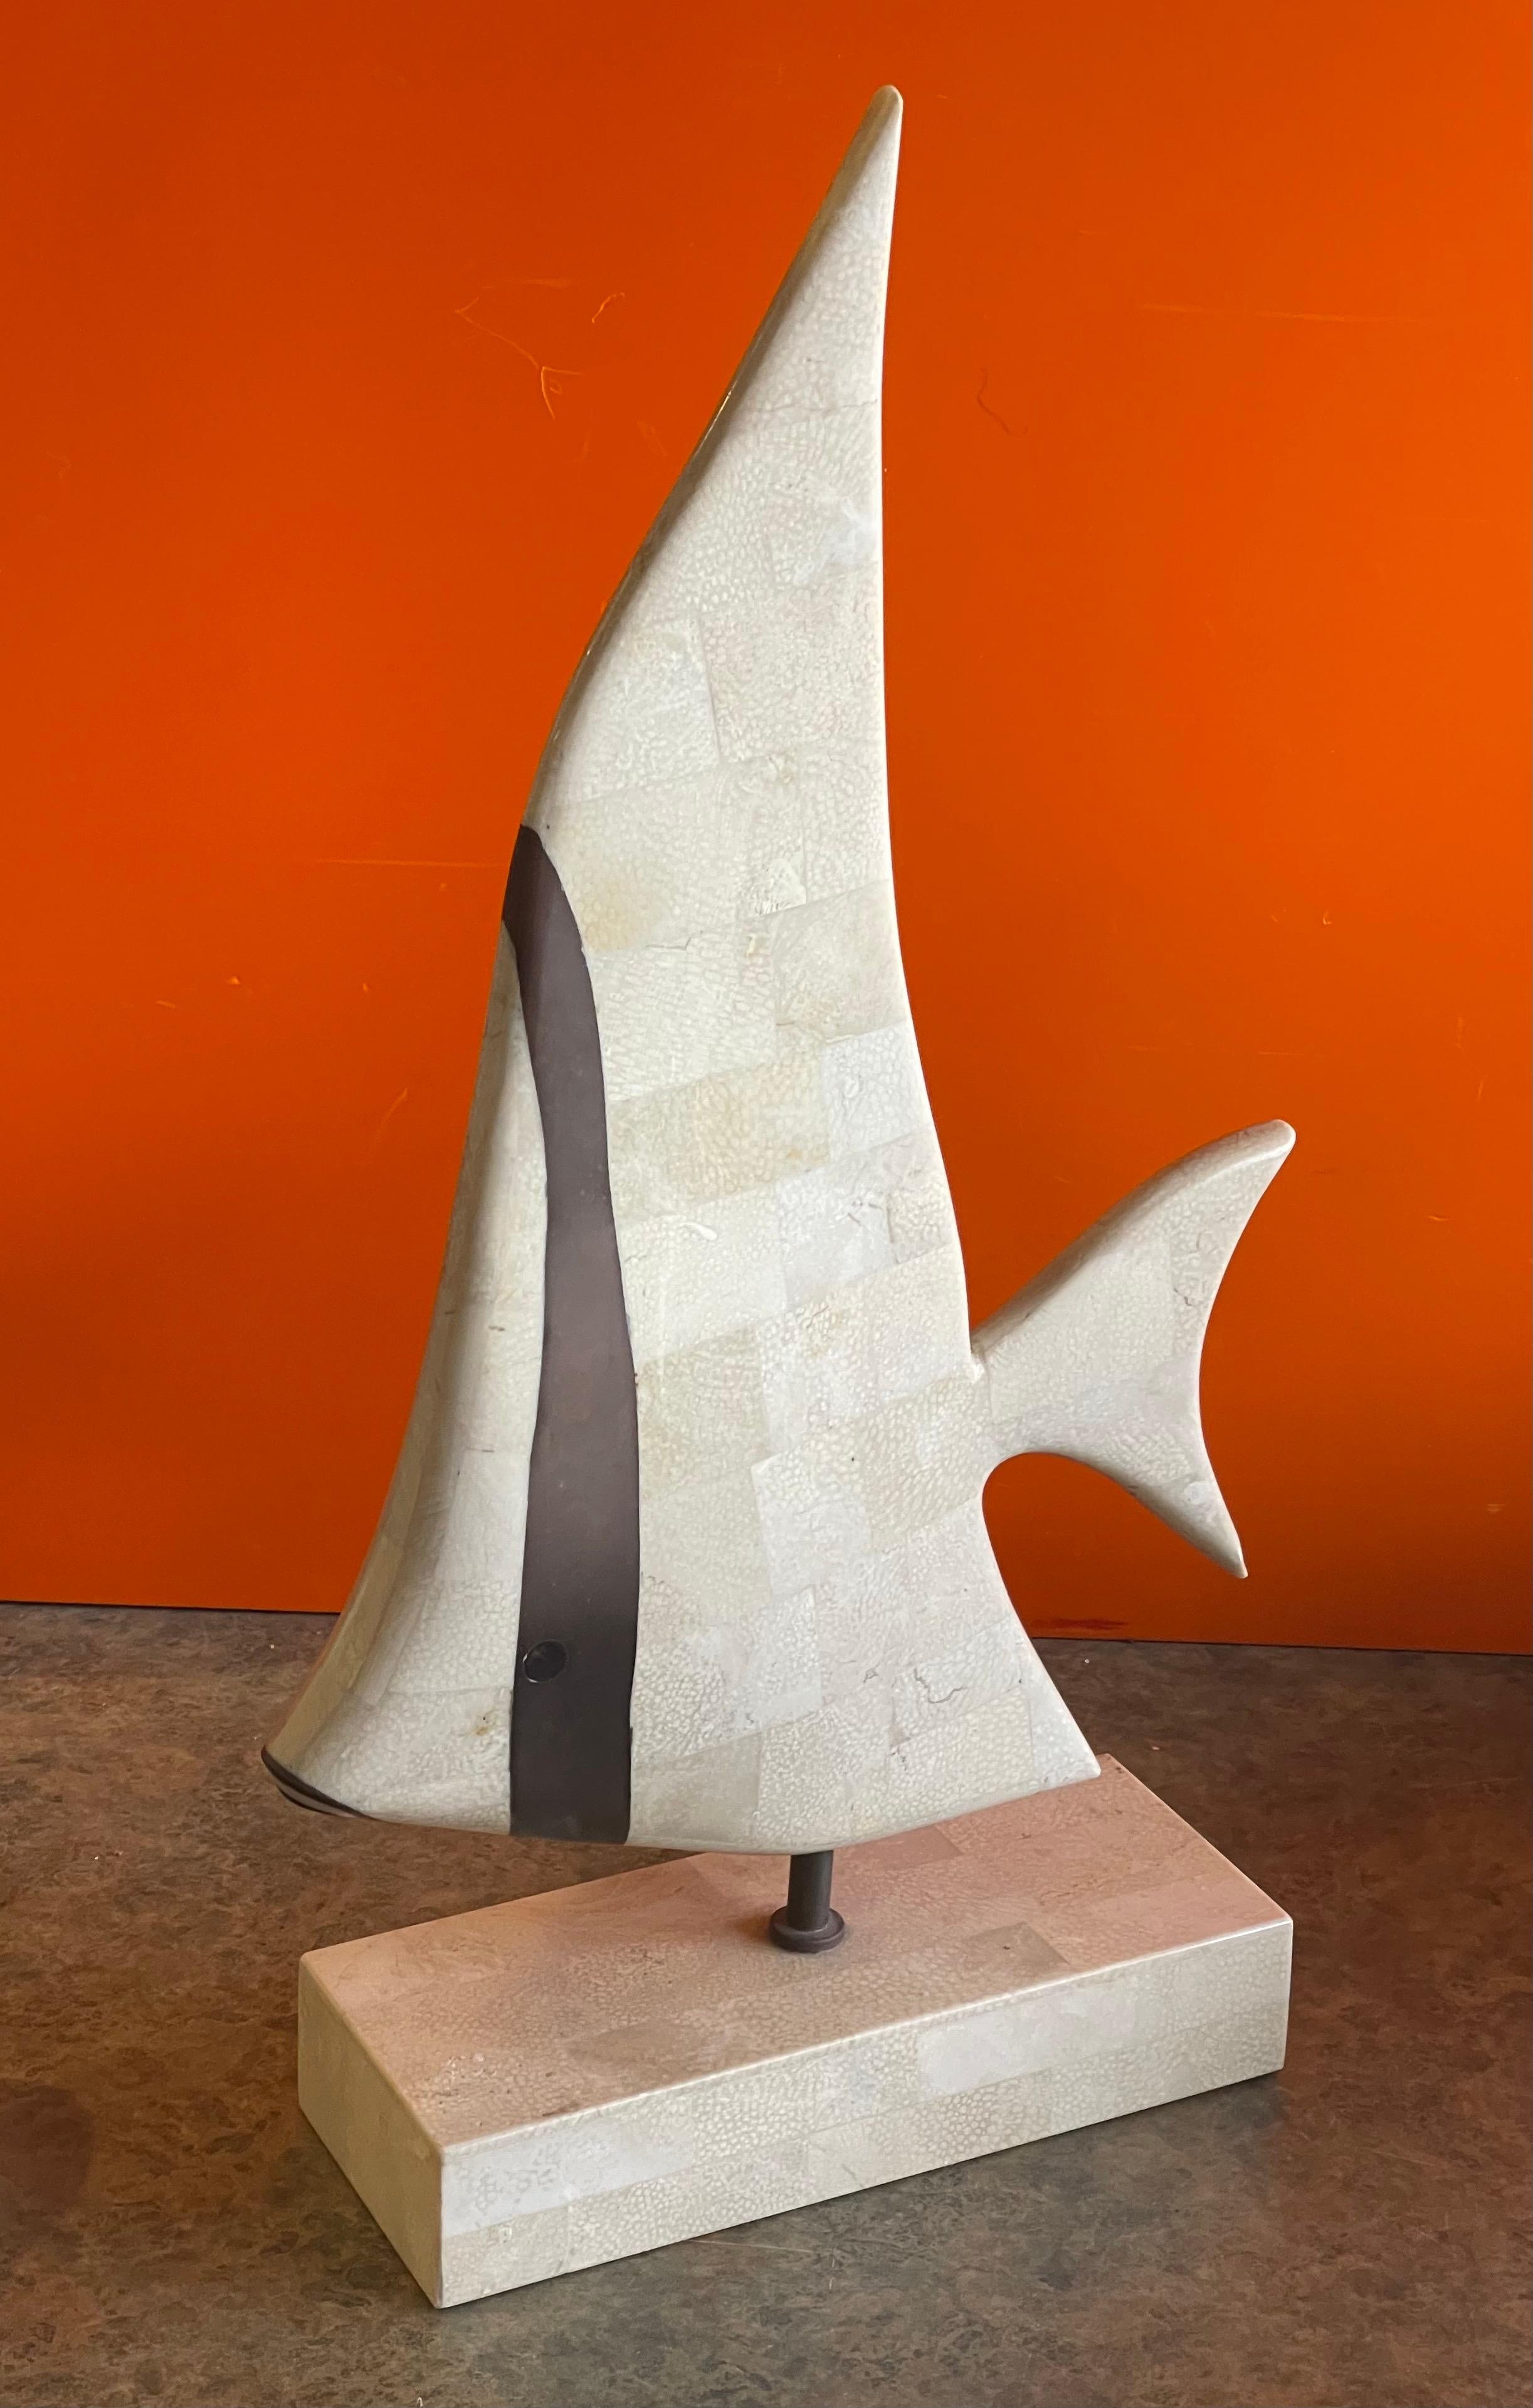 Tessellated coral stone and brass angel fish sculpture on stand by Maitland Smith, circa 1970s. The piece is in very good vintage condition and measures 9.5